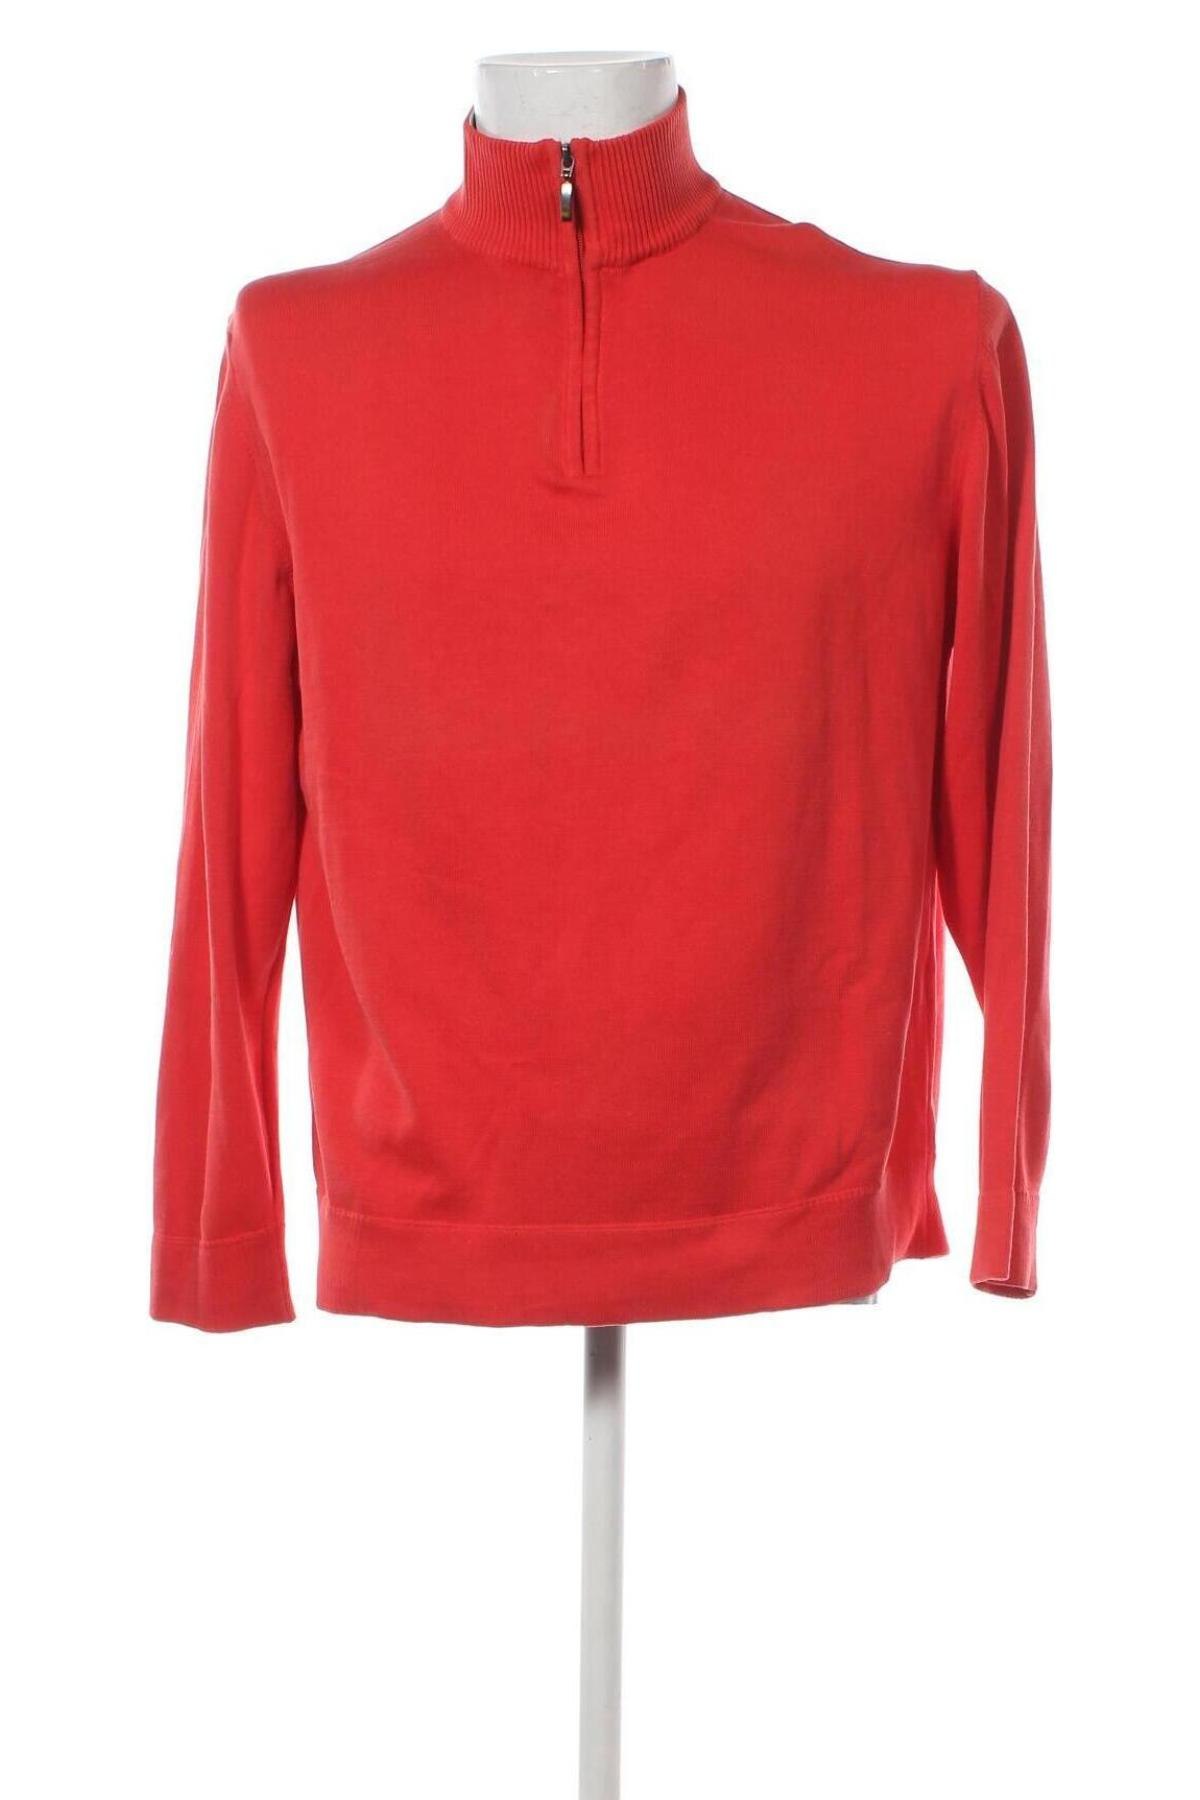 Herrenpullover Authentic Clothing Company, Größe XL, Farbe Rot, Preis 7,06 €